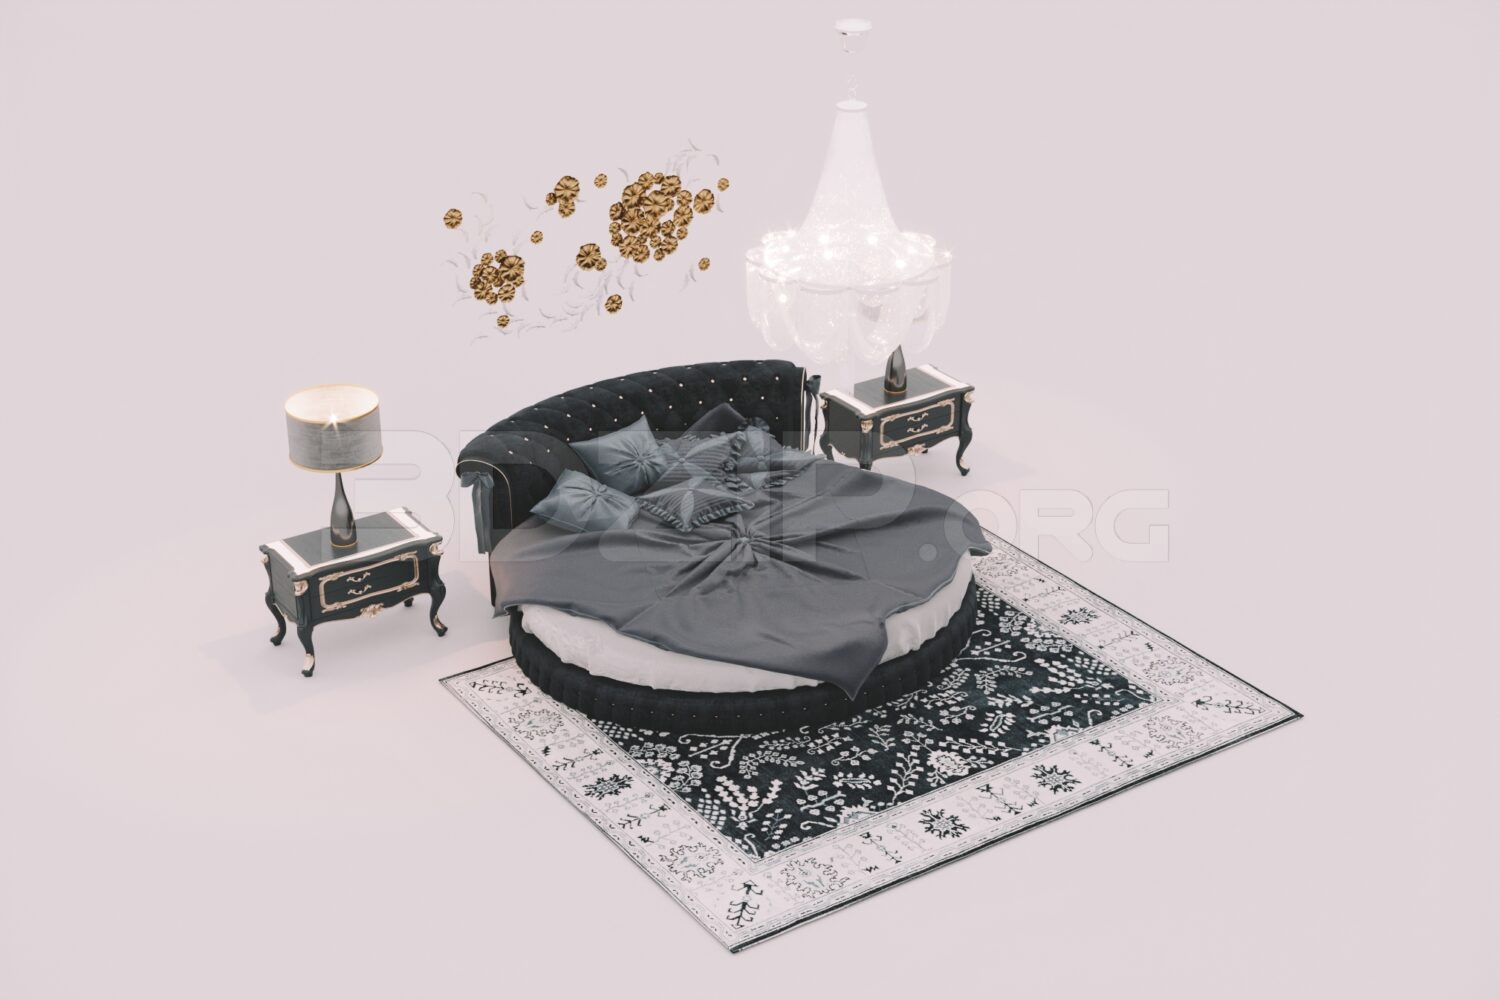 2122. Download Free Bed Model By Le Dang Thuan